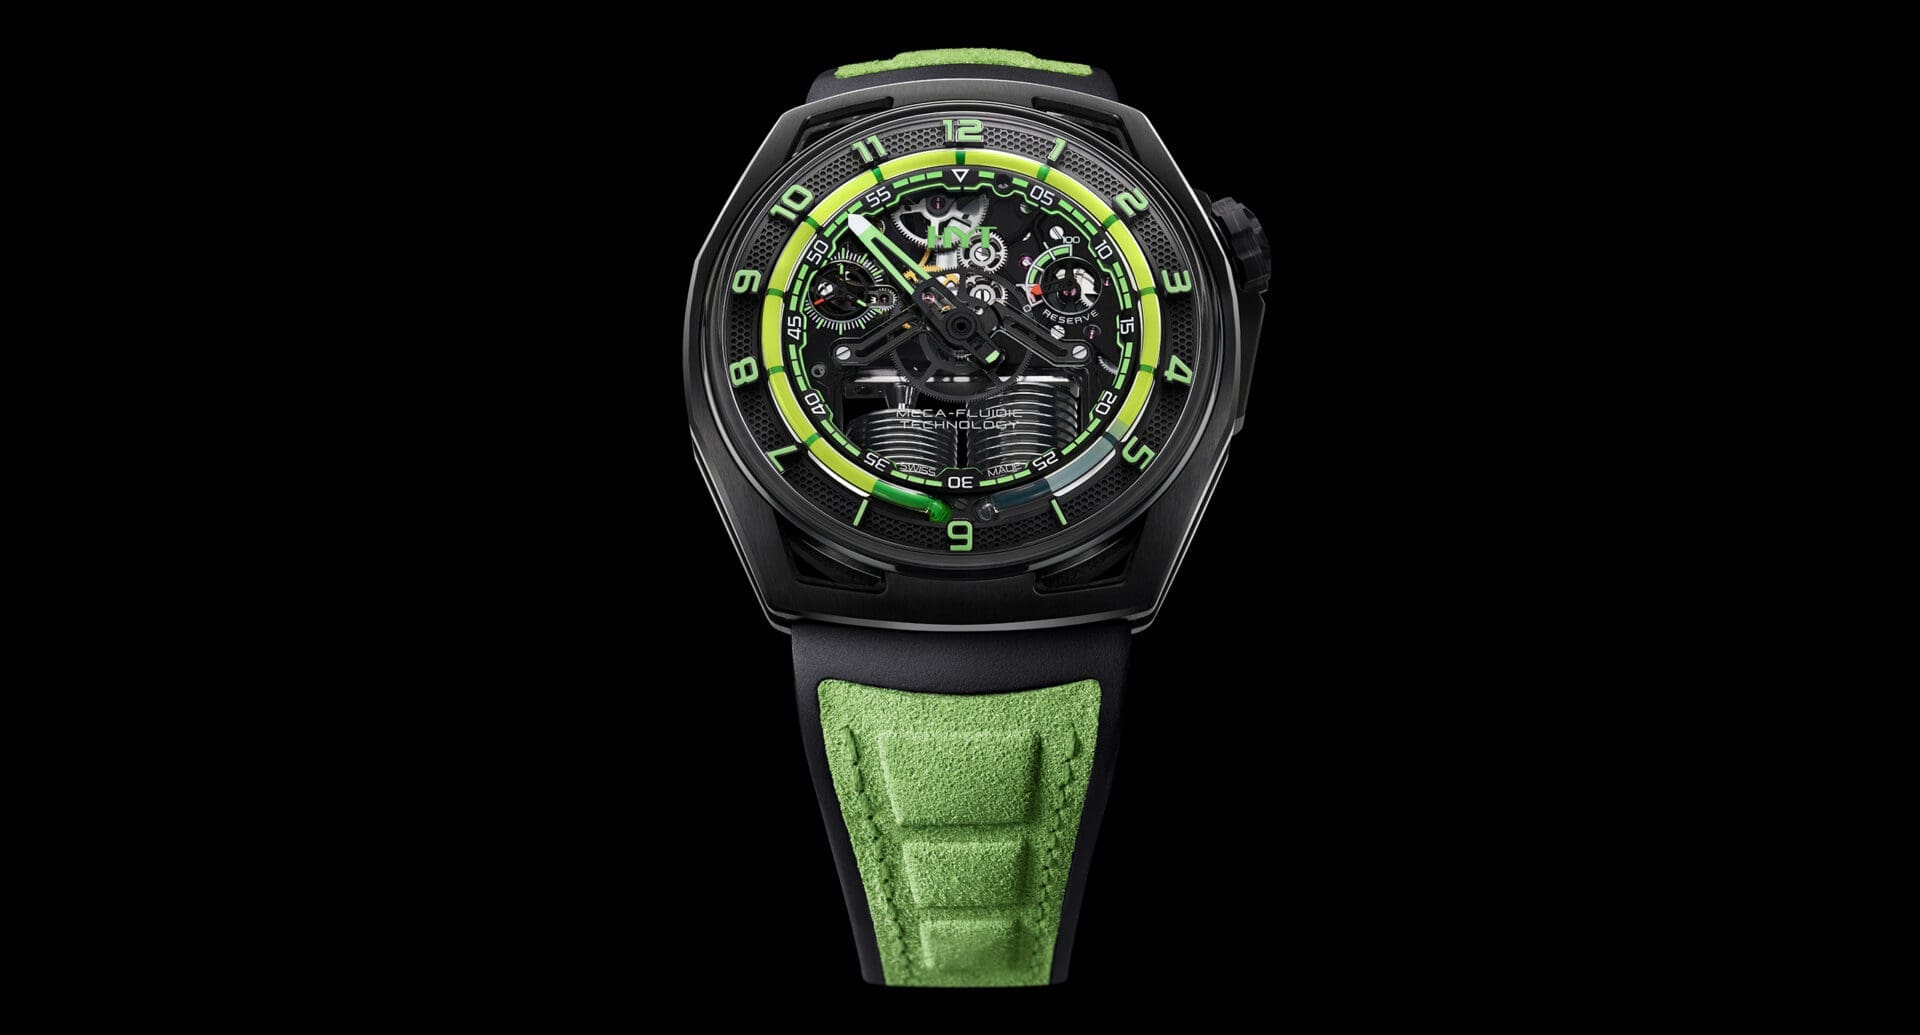 INTRODUCING: The HYT Hastroid is like an alien spaceship for the wrist (in a good way)